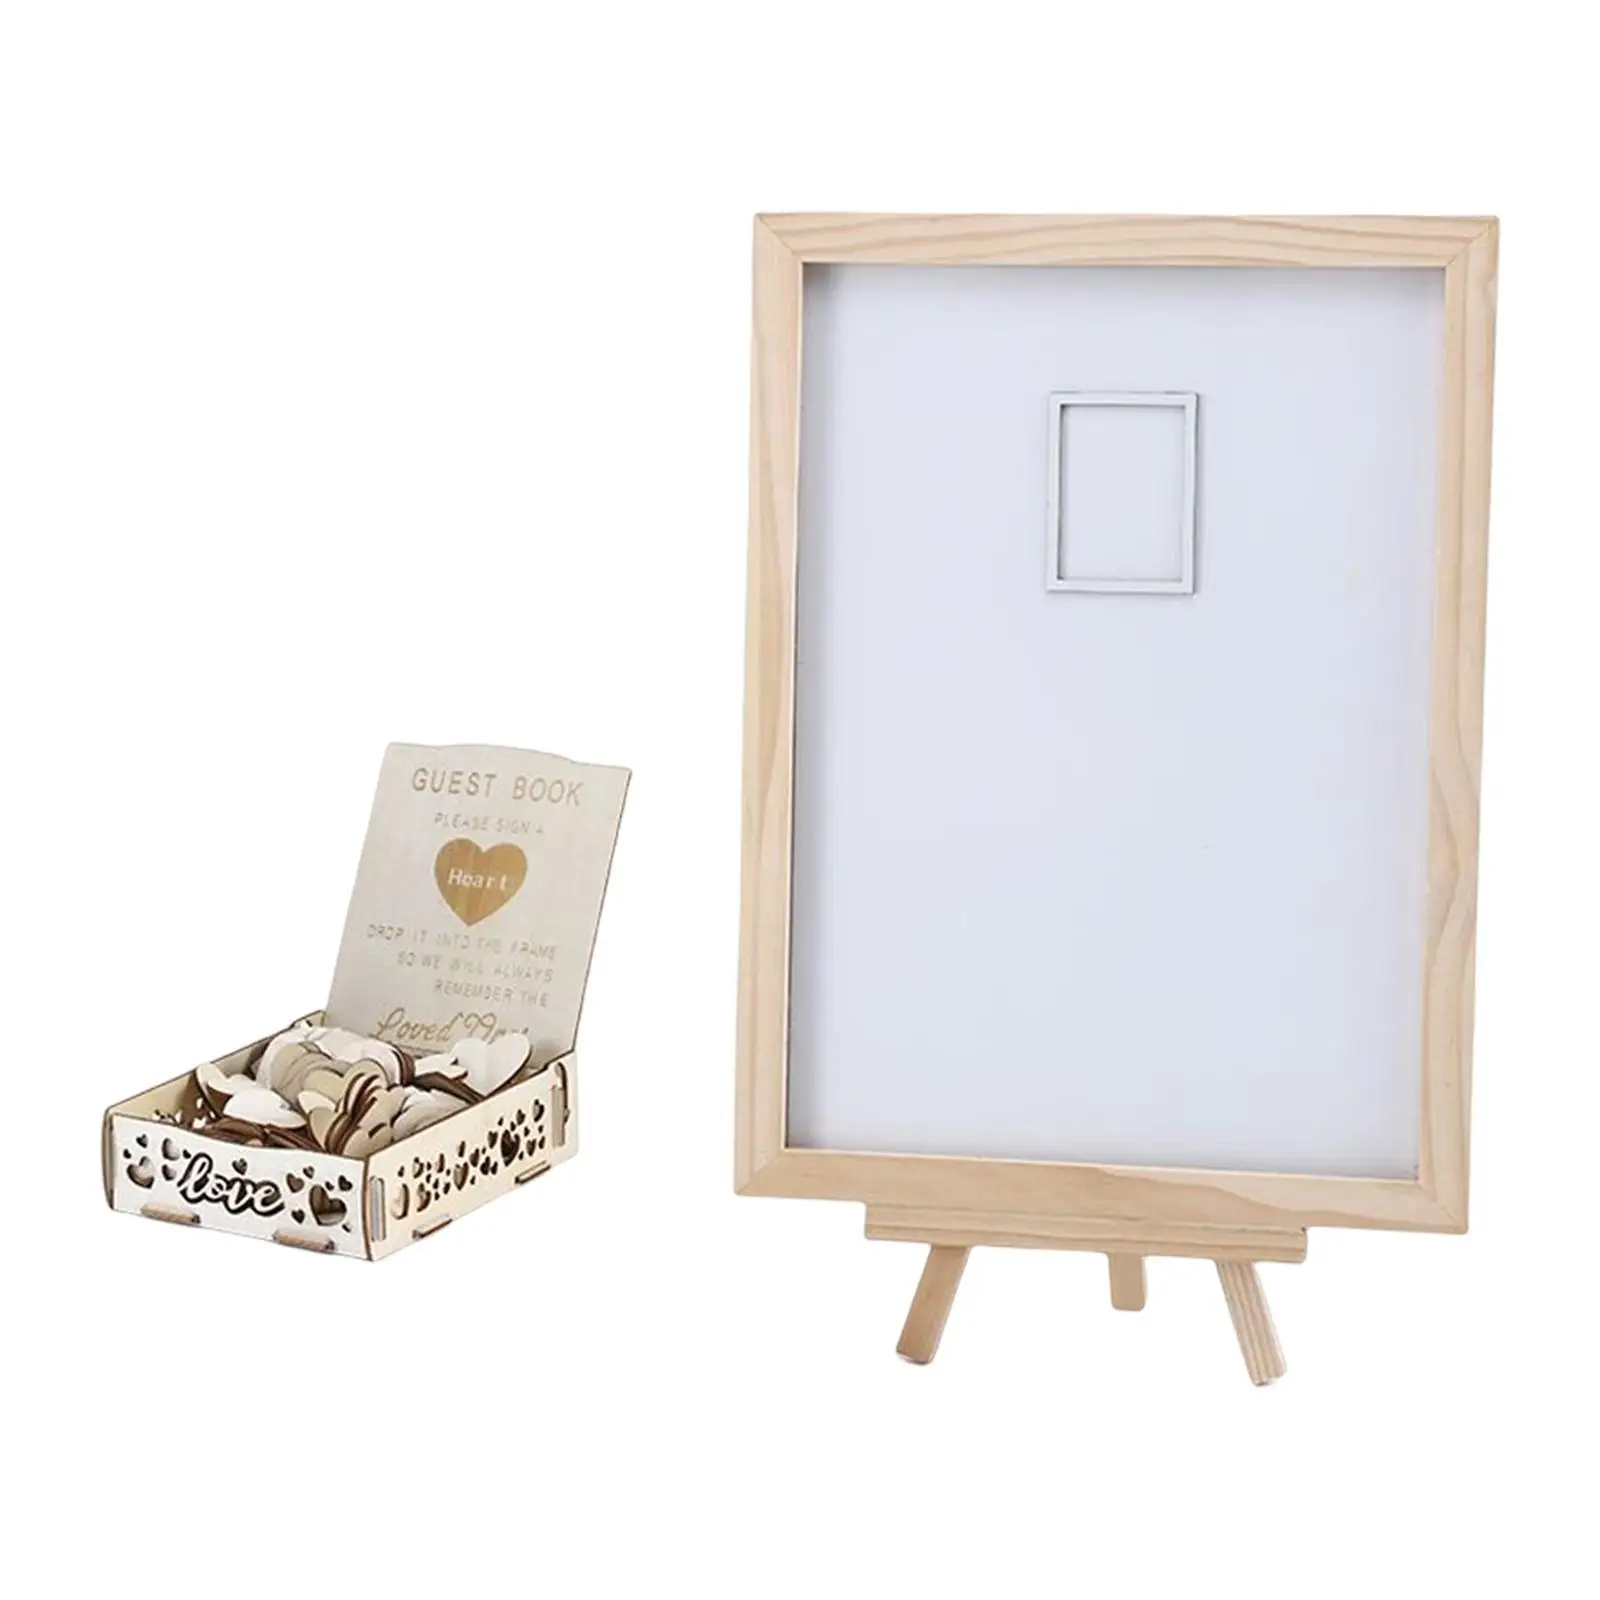 Unique Wedding Guest Book Sign Book Heart Drop Box Guestbook for Funeral Reception Birthday Special Events Decor